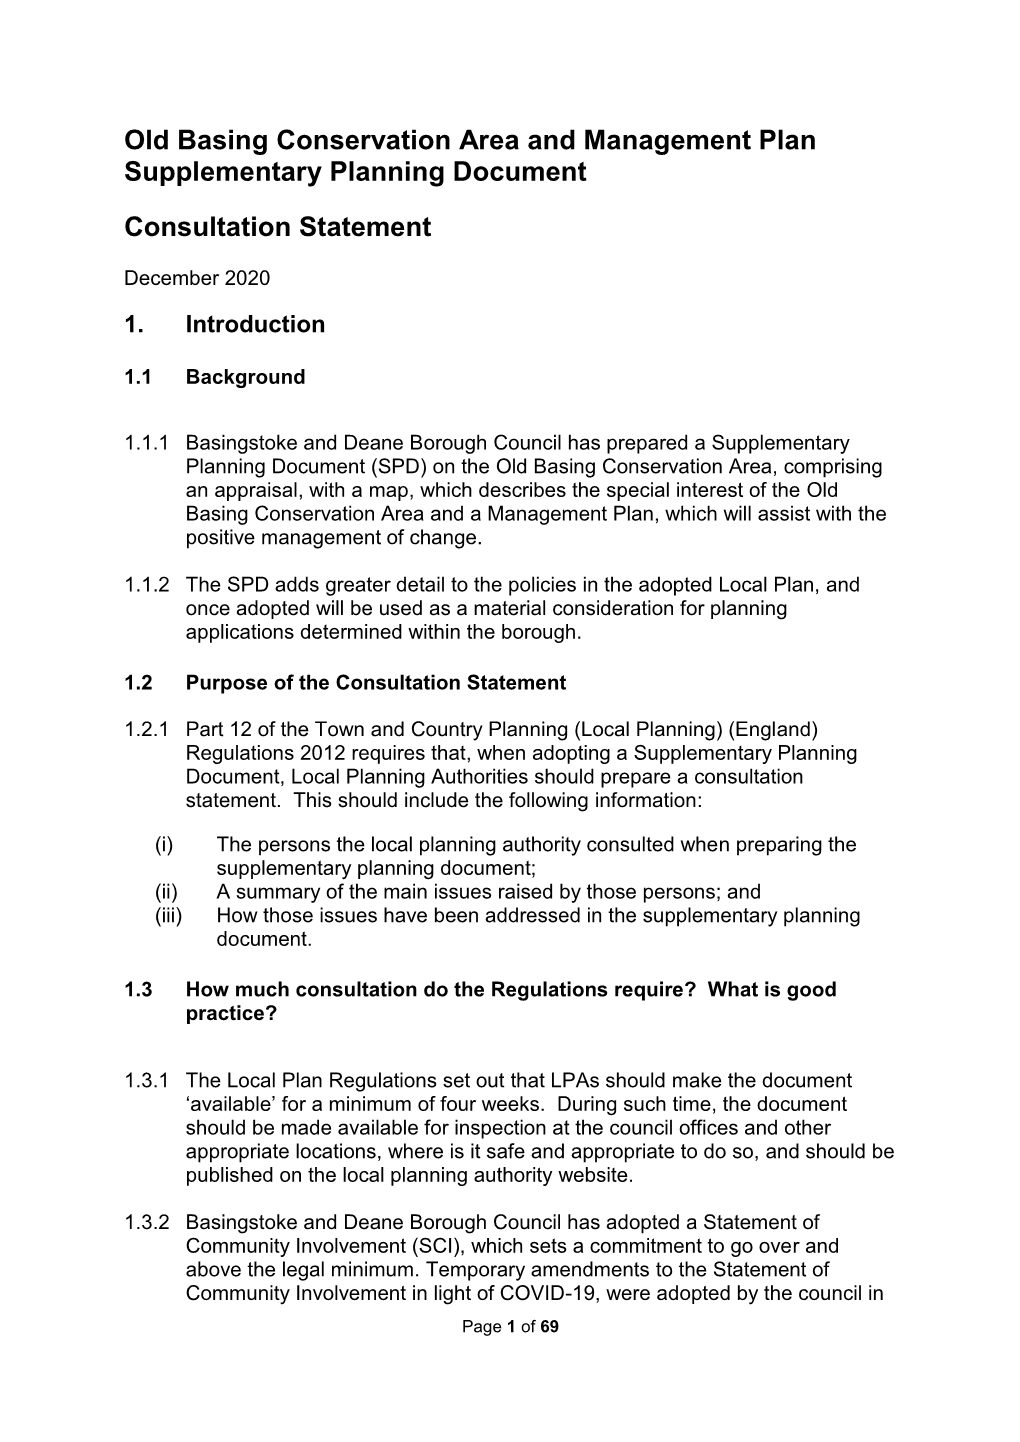 Old Basing Consultation Statement FINAL